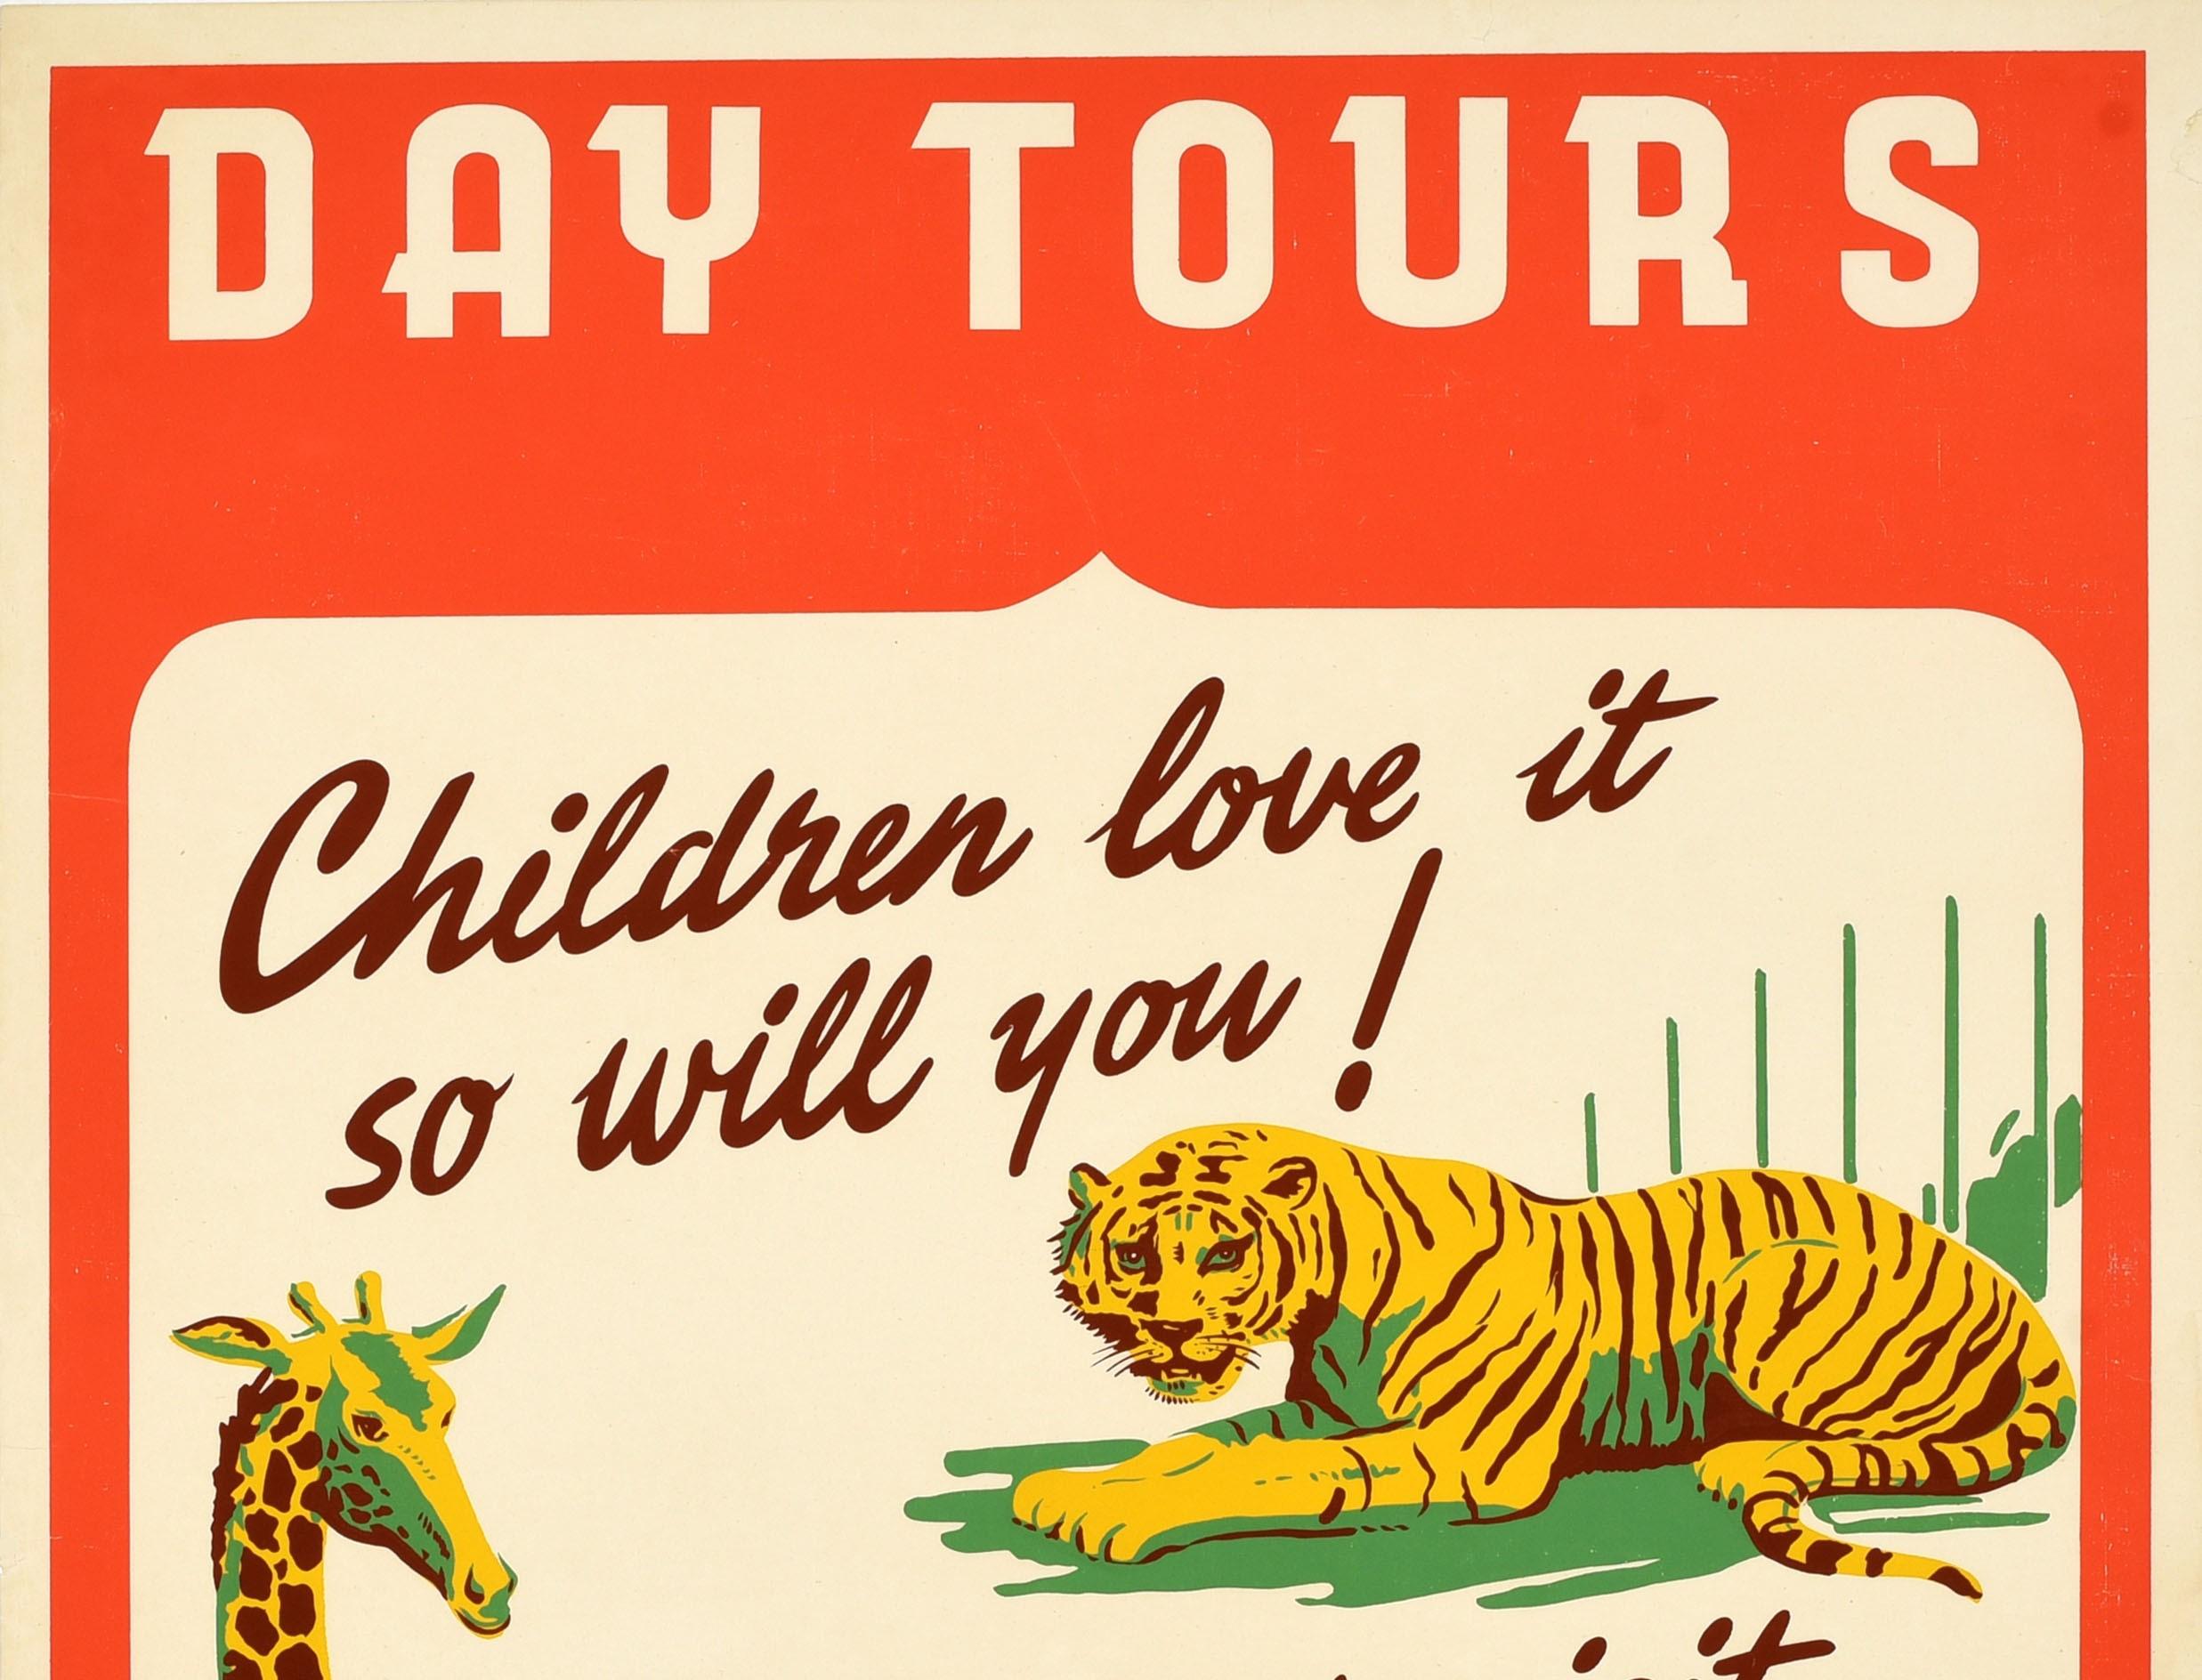 Original Vintage Poster Longleat Zoo Tiger Giraffe Wilts & Dorset Bus Day Tours - Print by Unknown